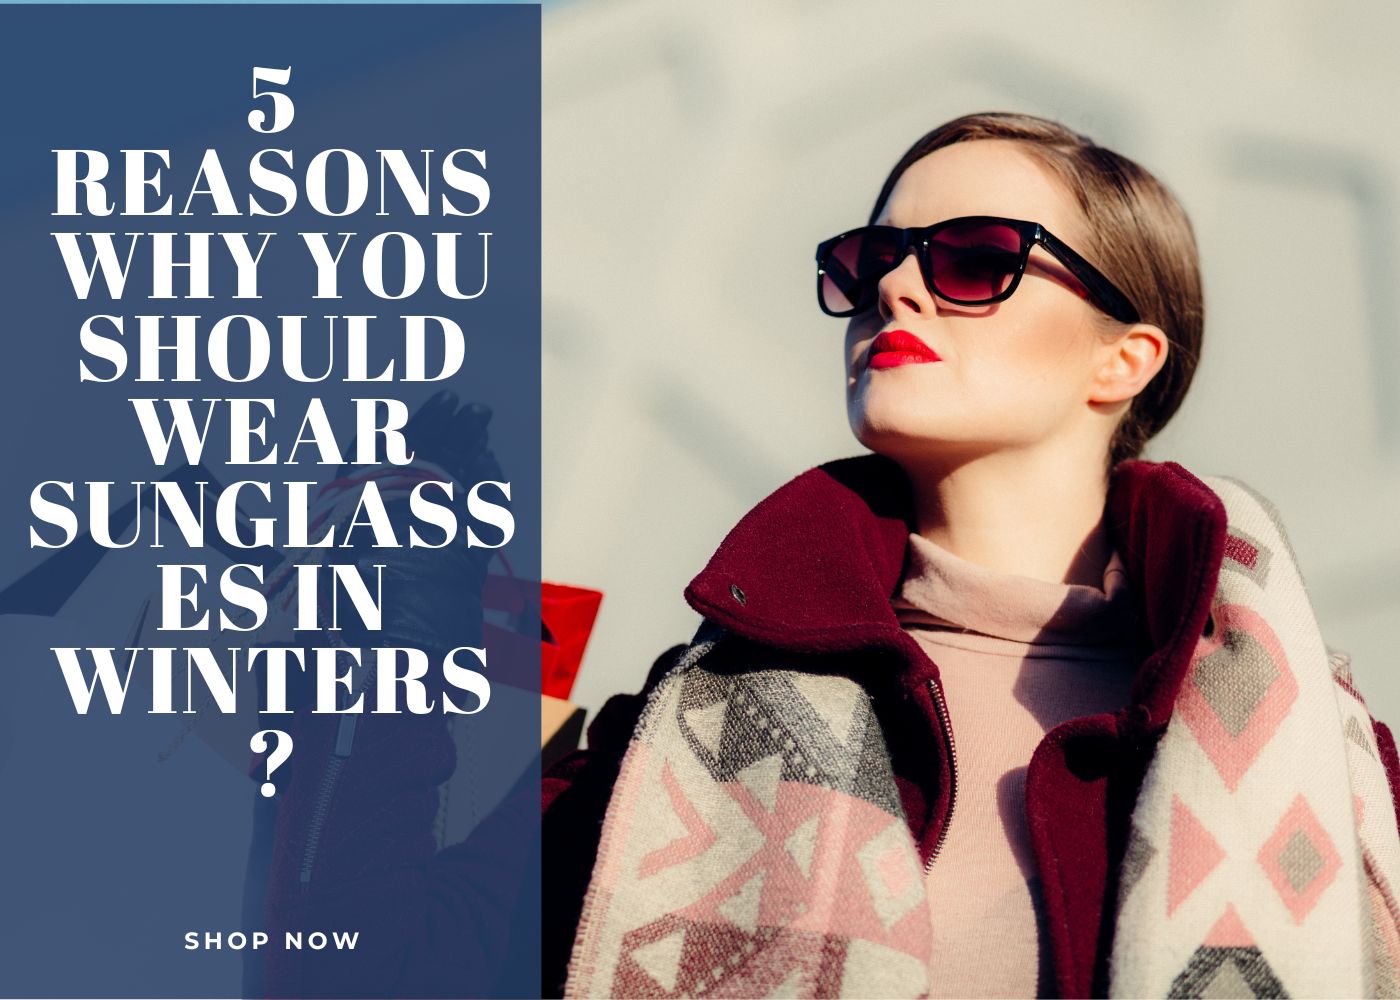 5 Reasons Why You Should Wear Sunglasses in Winters?